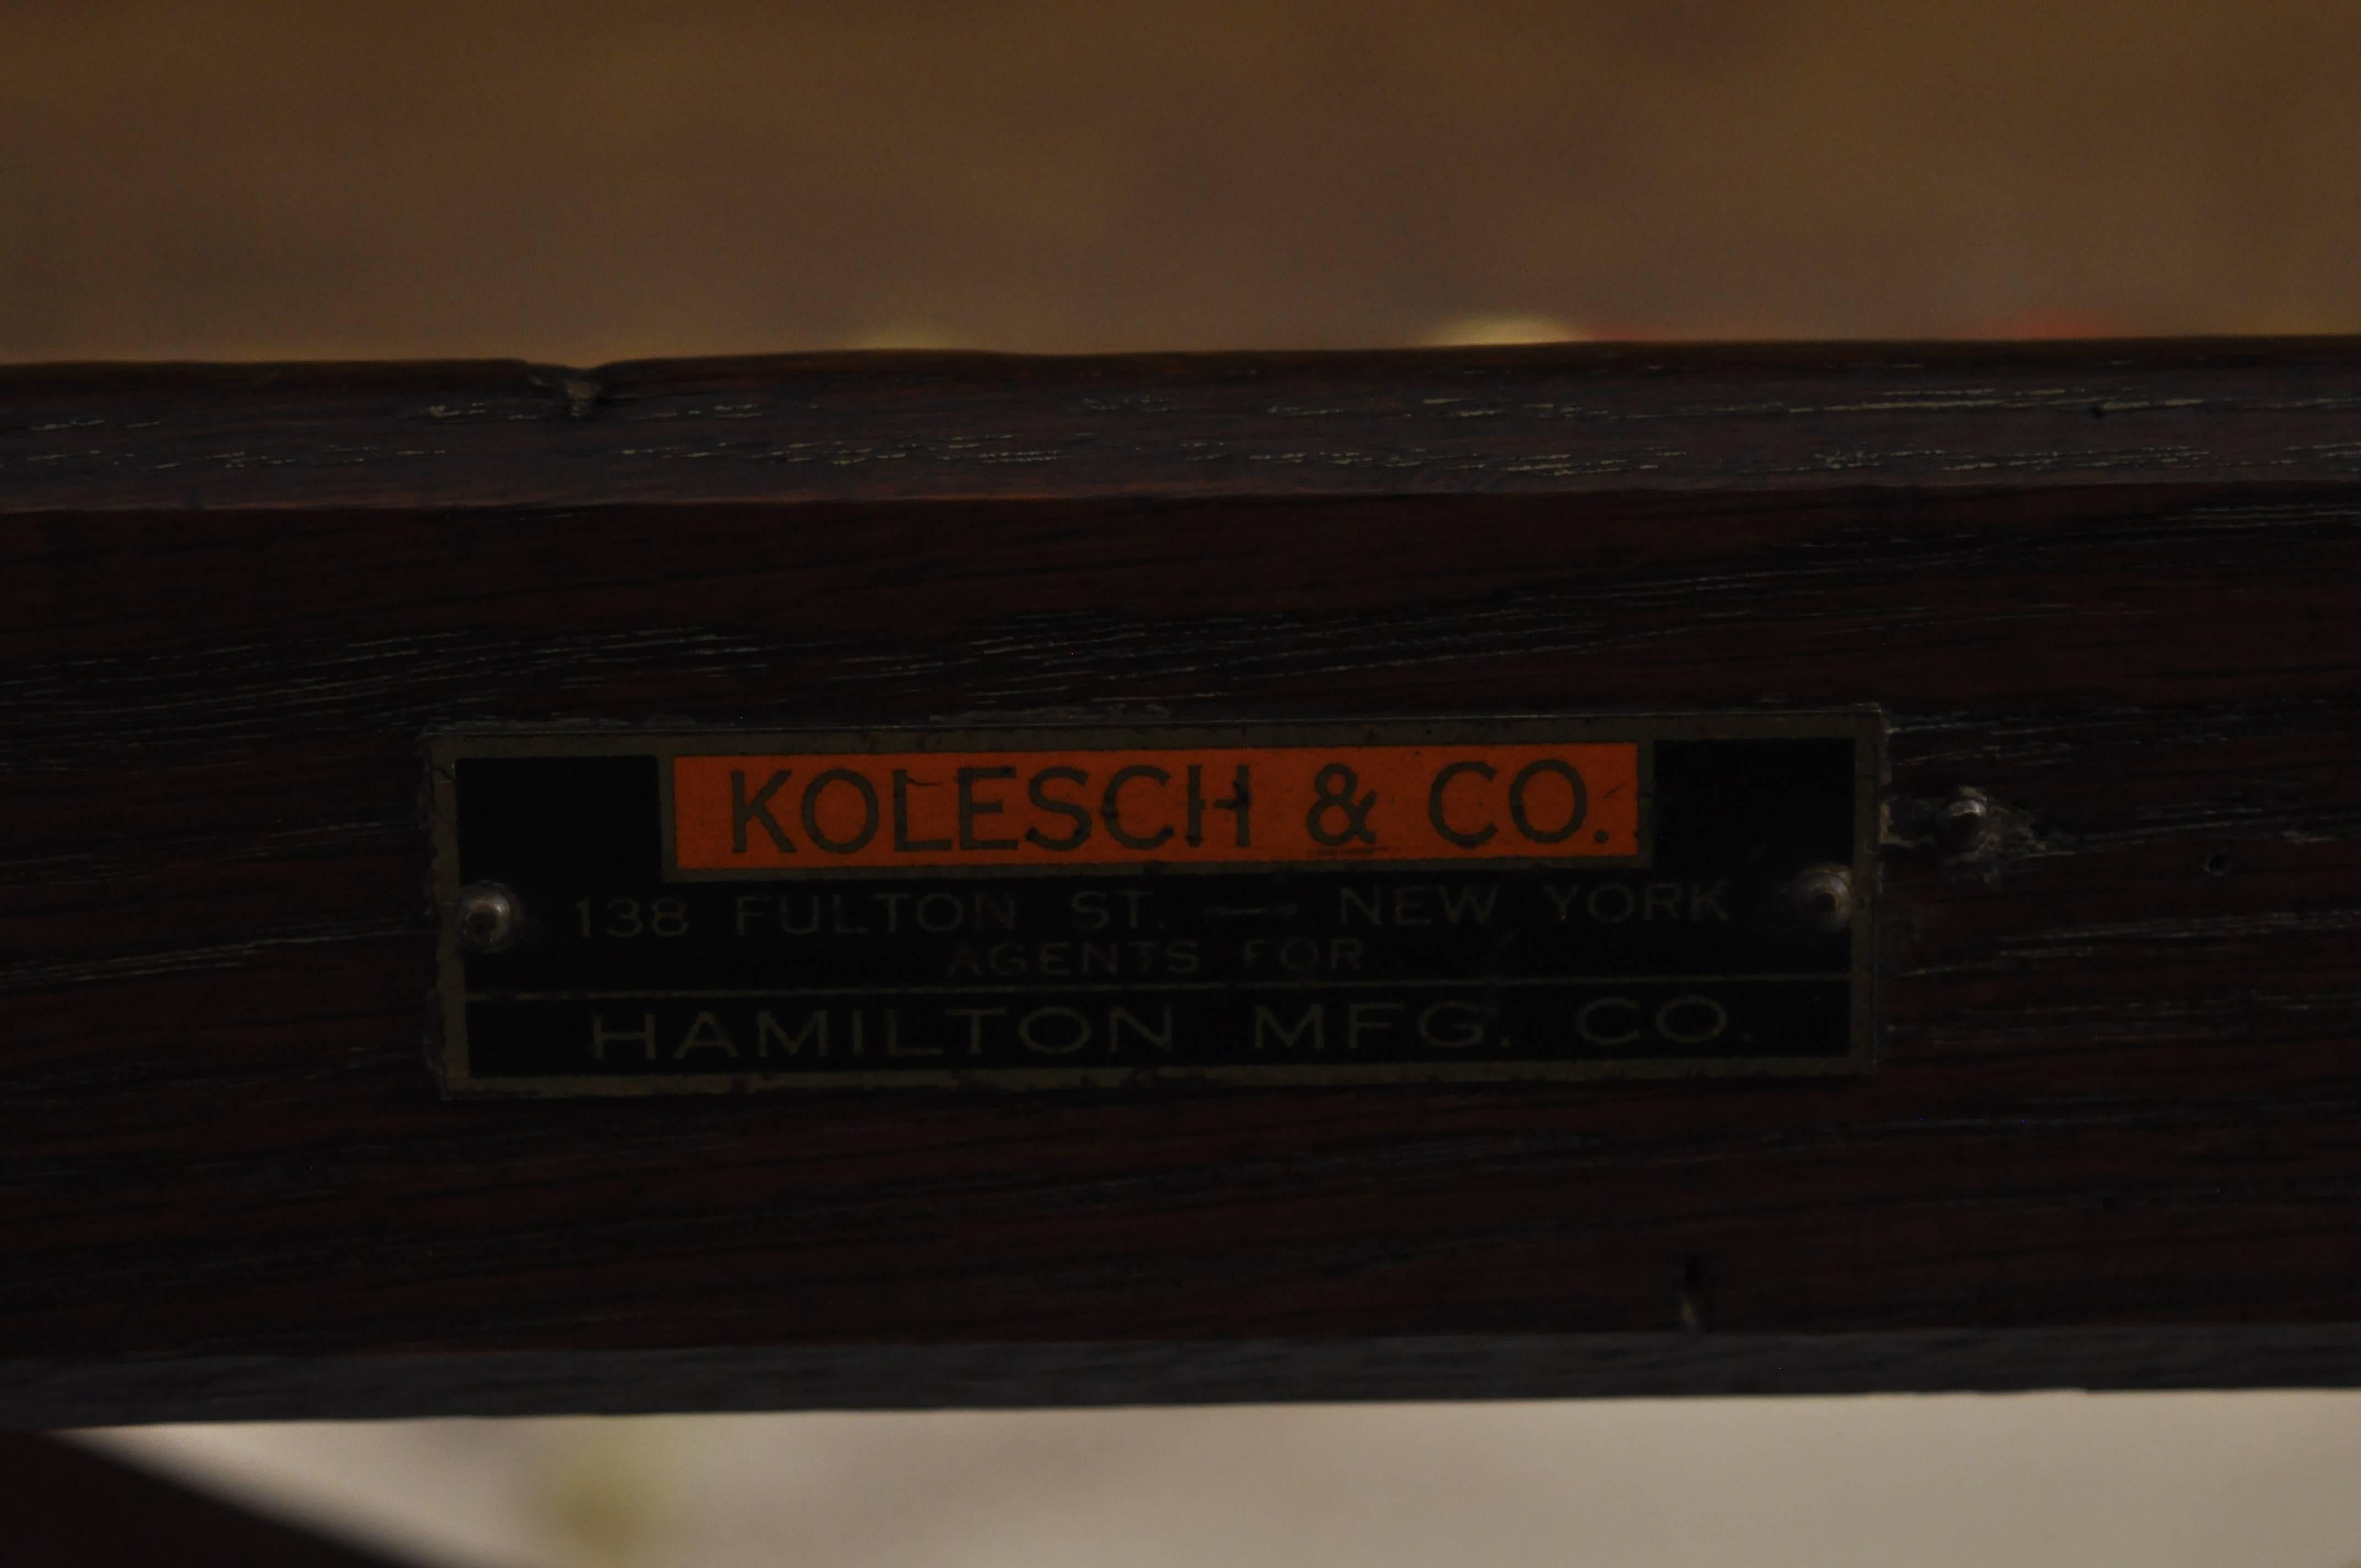 Item: Antique Kolesch & Co Hamilton Mfg oakwood, and cast iron drafting table

Details: Solid wood construction, fully adjustable, cast iron supports, original label

Age: Early 20th century.

Measurements: 

Work surface 48